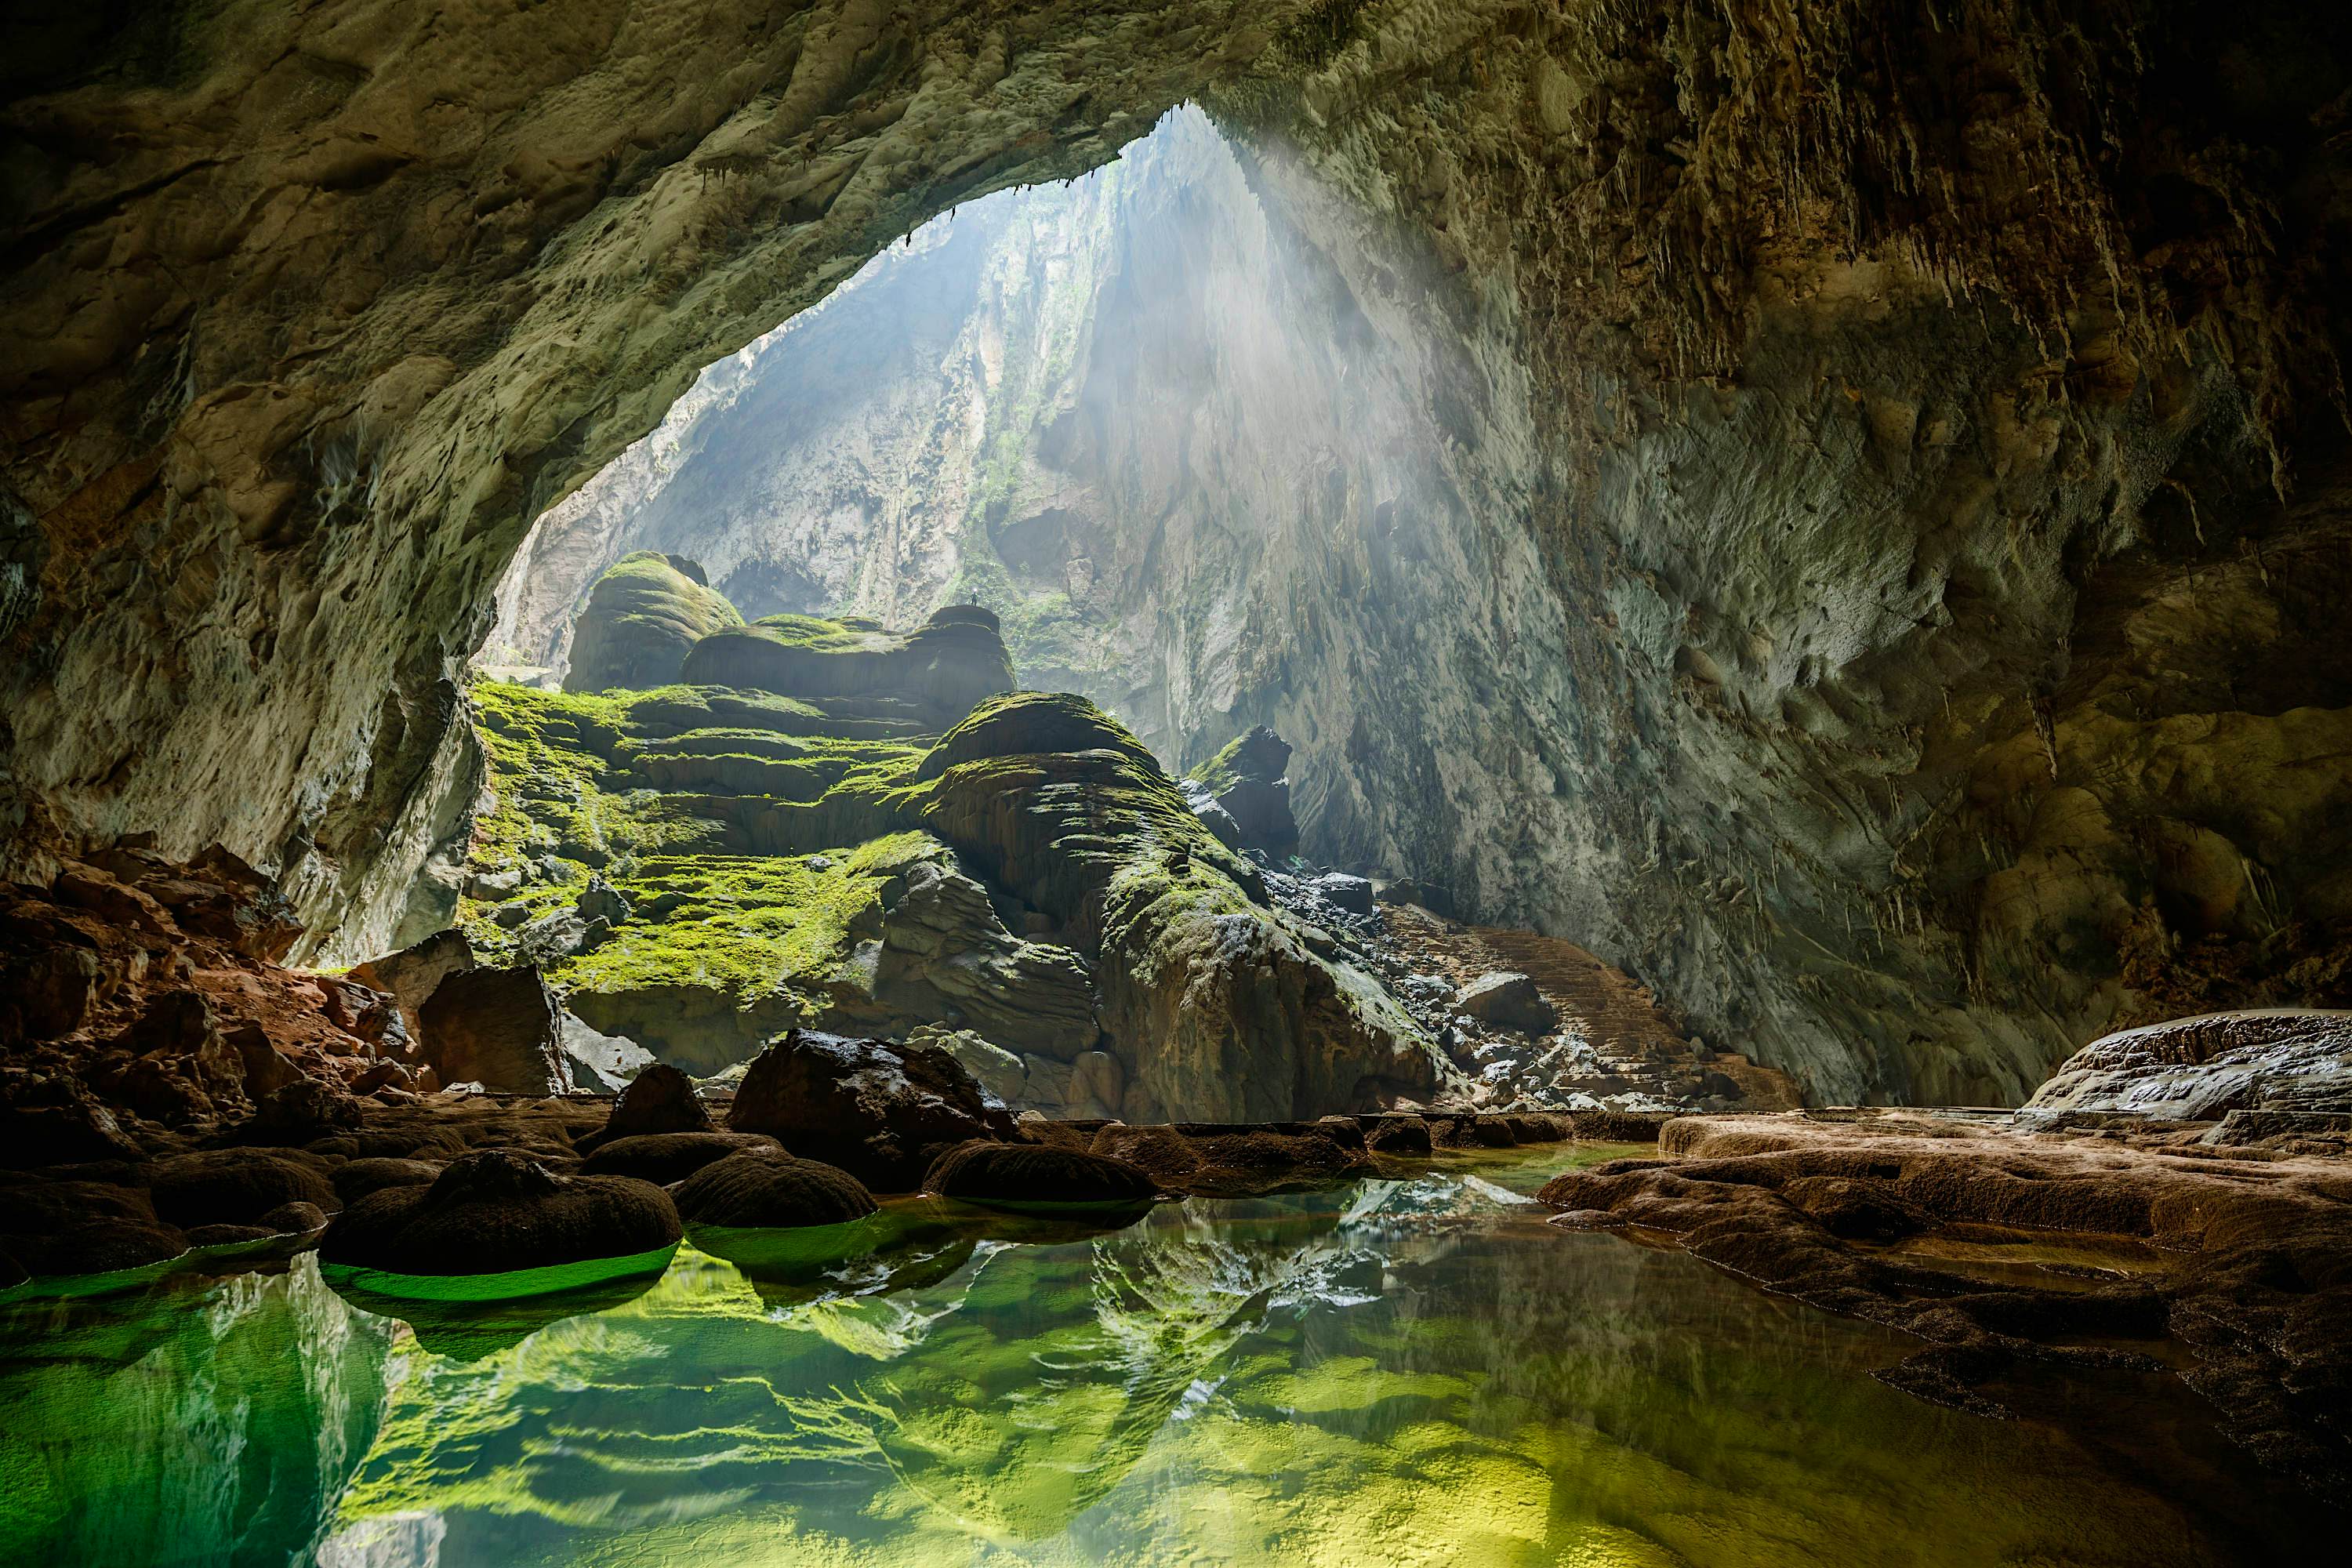 Sunlight shines down through an opening in the cave into a clear green pool of water